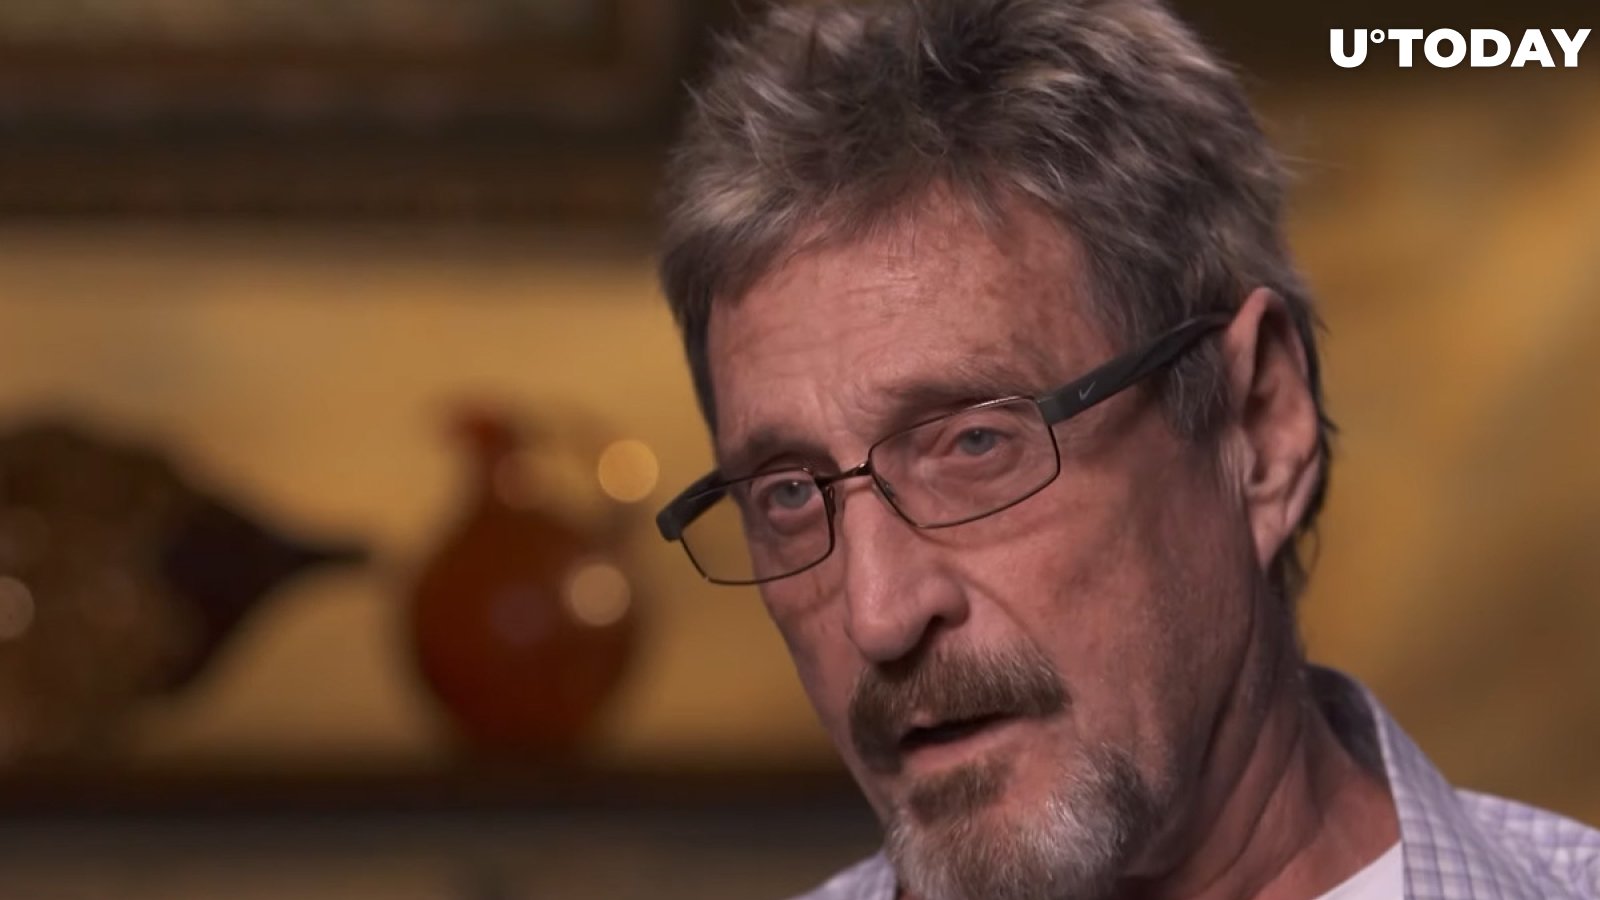 John McAfee's Verdict on Extradition to Be Announced In Coming Days